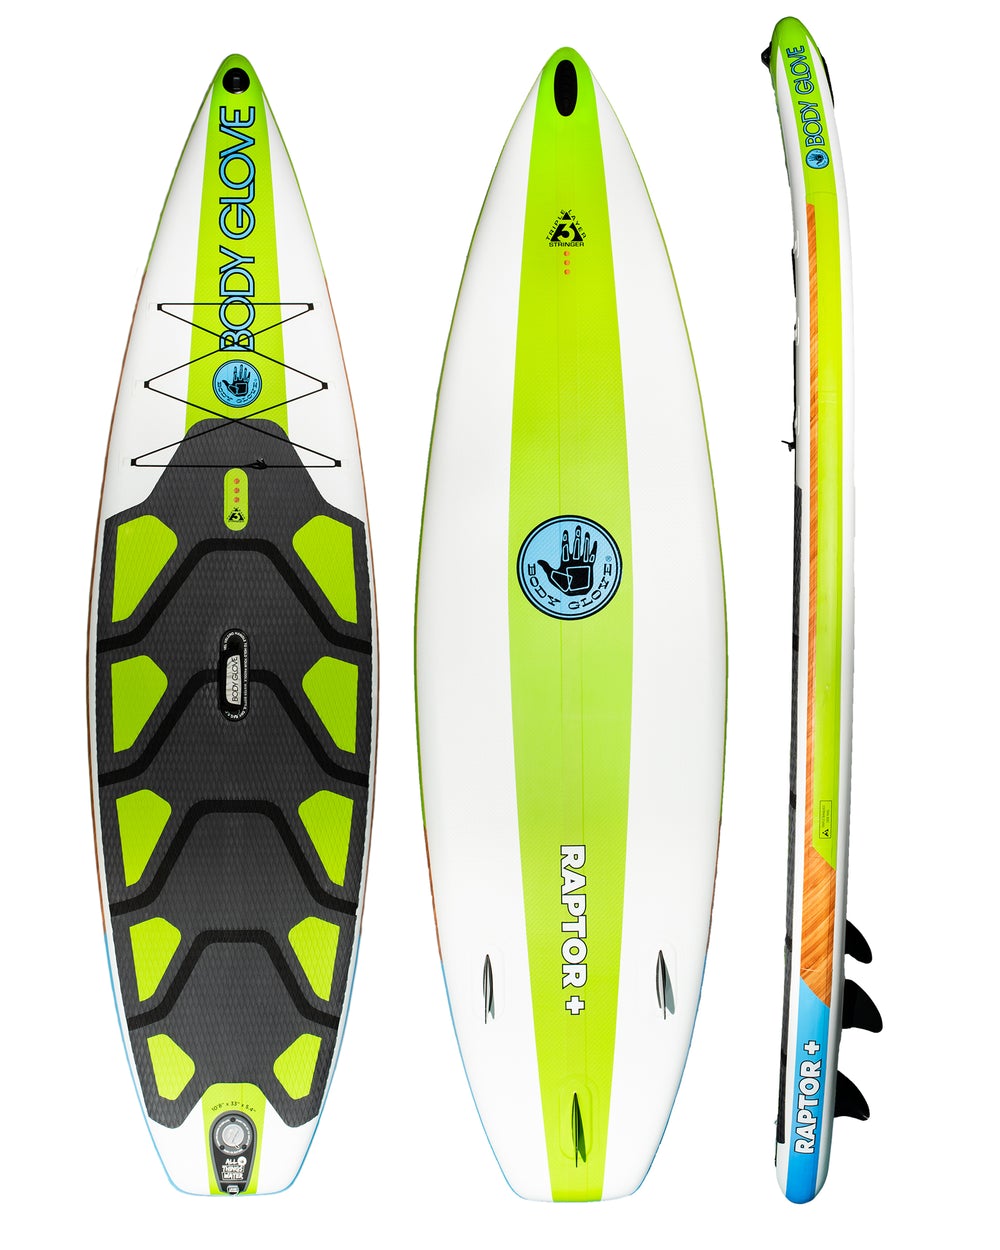 isuprptpls-349___raptor-plus-108-inflatable-stand-up-paddle-board-isup-with-bag-paddle-pump-green-wood___front_1000x.jpeg